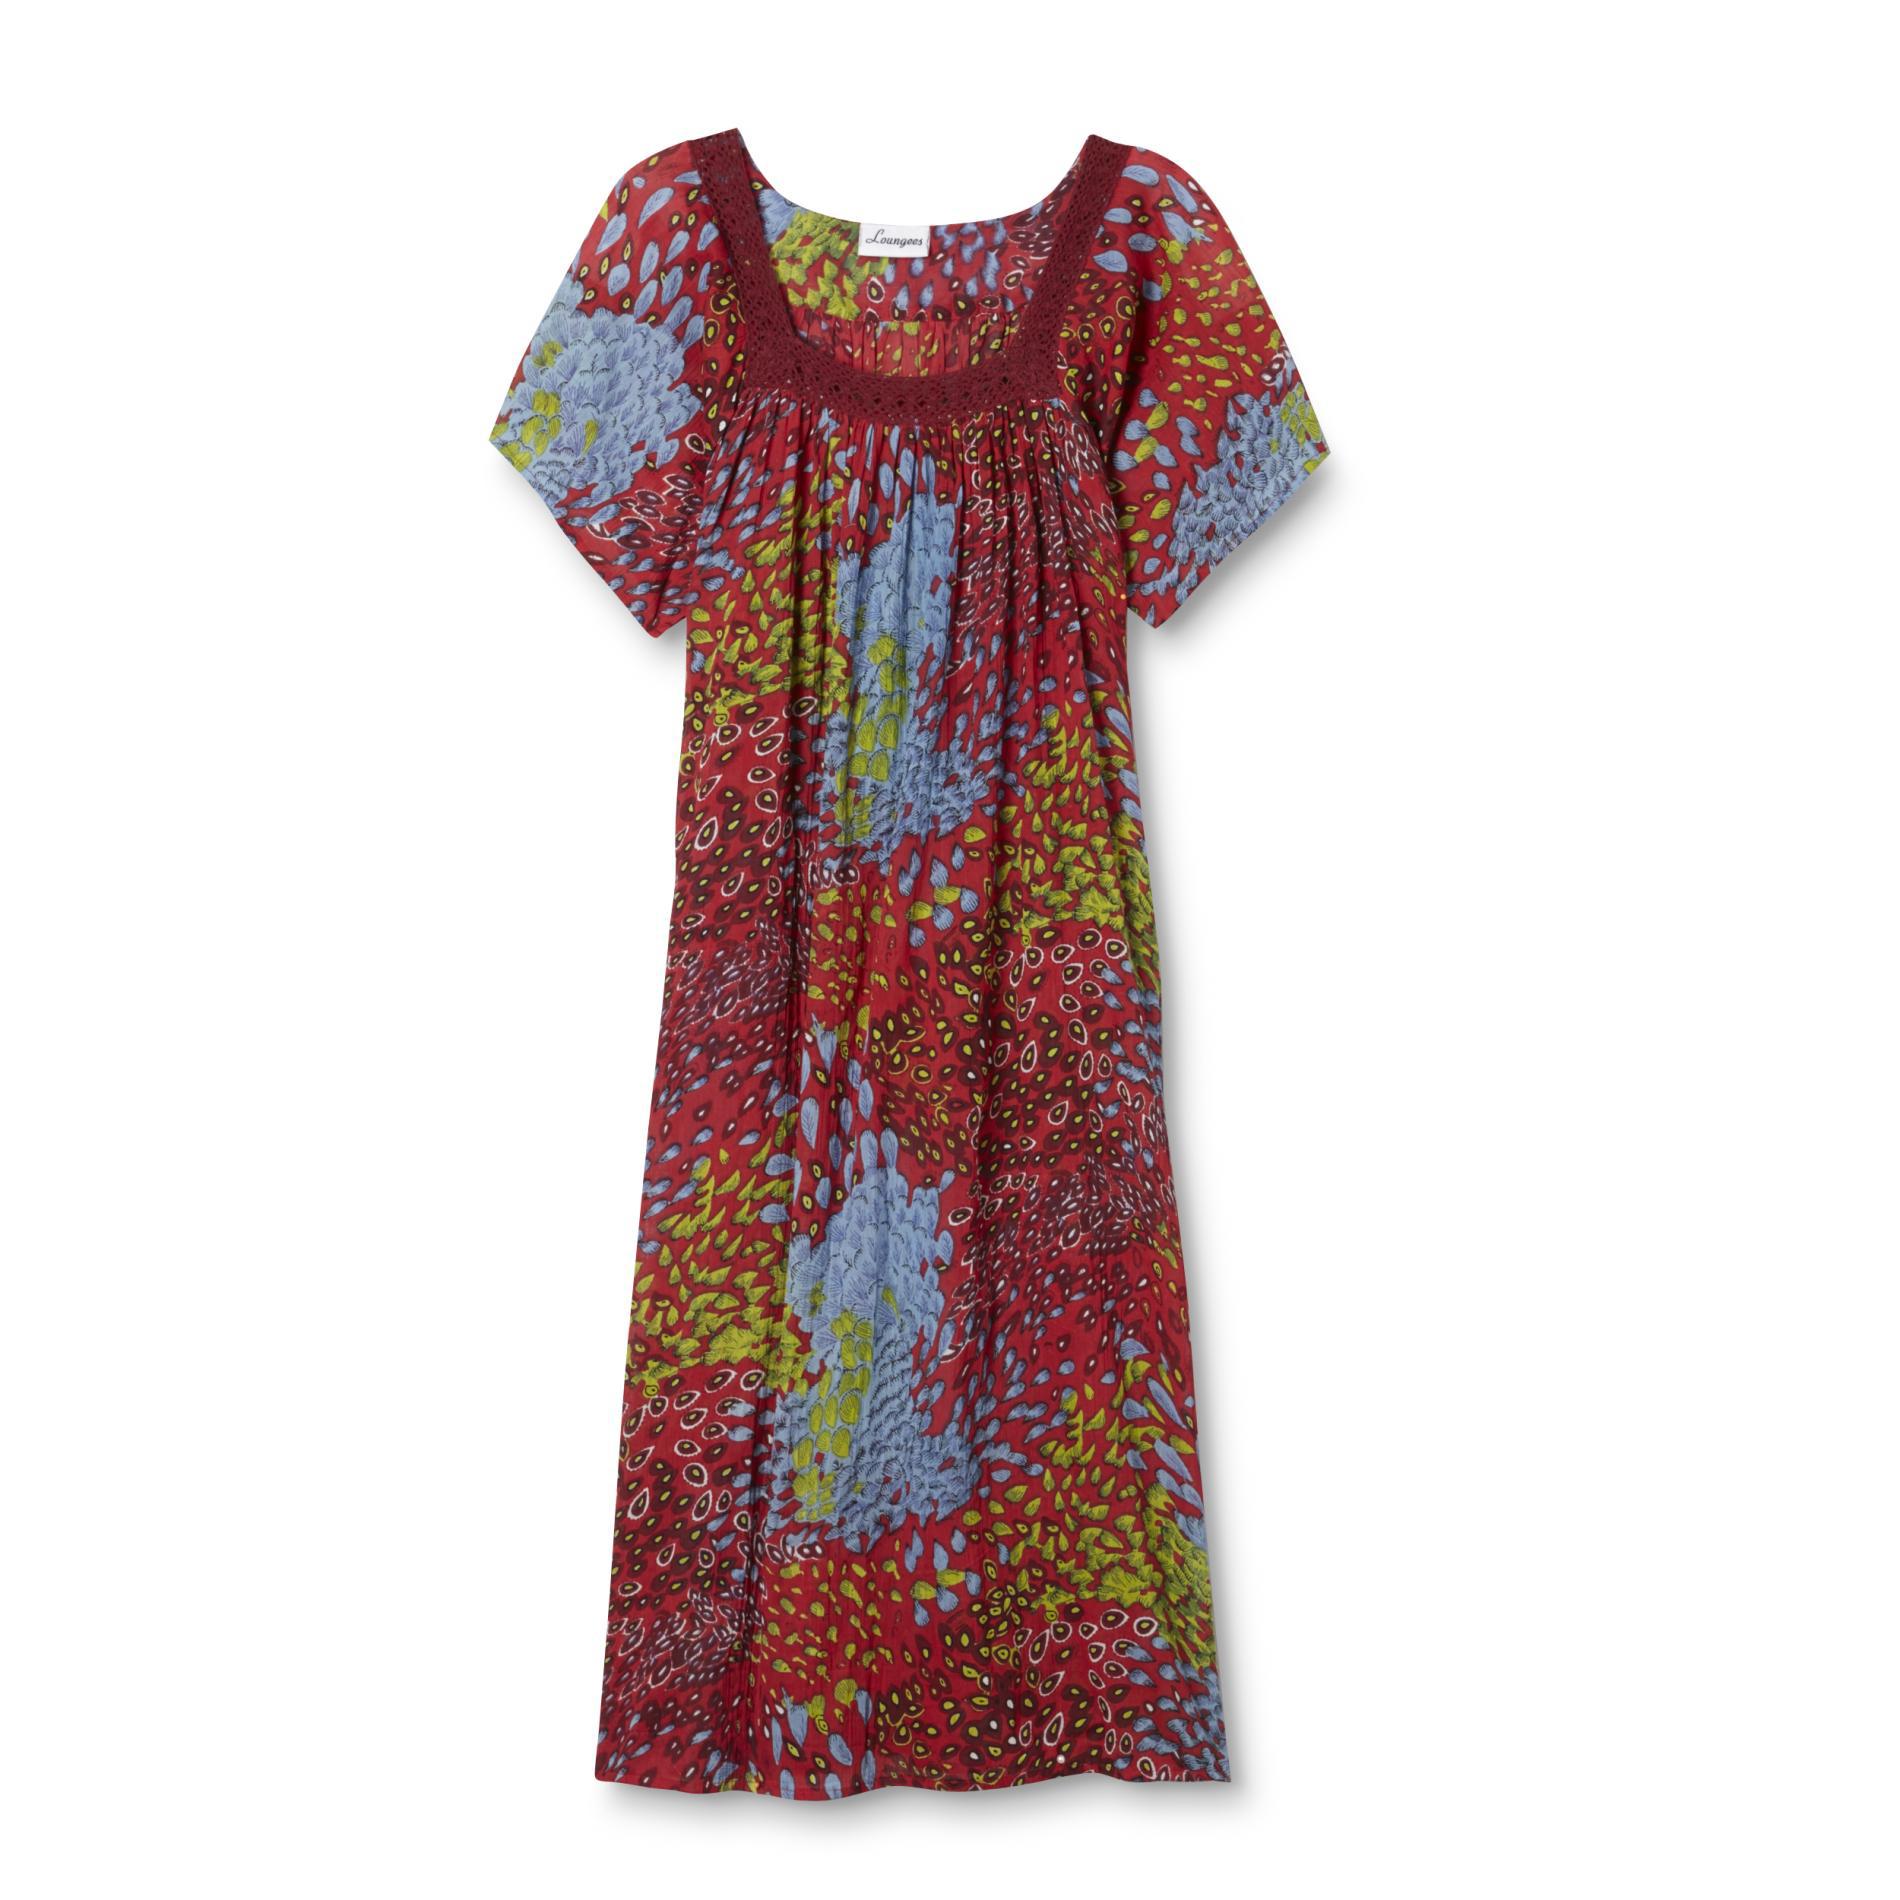 Loungess Women's Plus Crepon Nightgown - Peacock